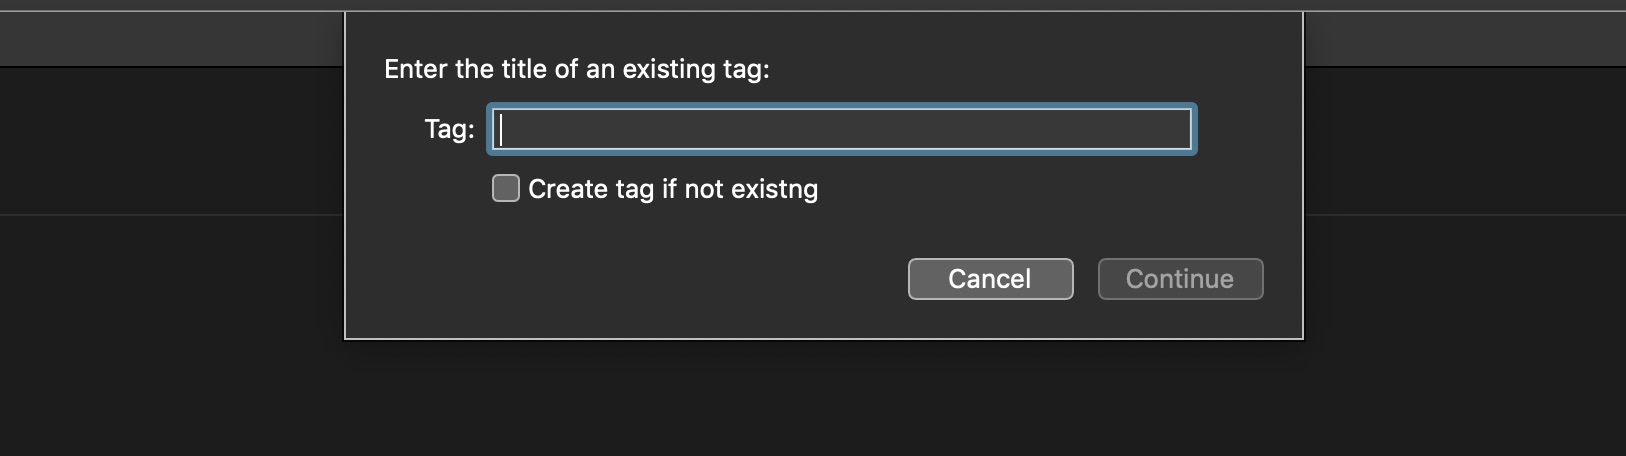 enter-existing-of-tag